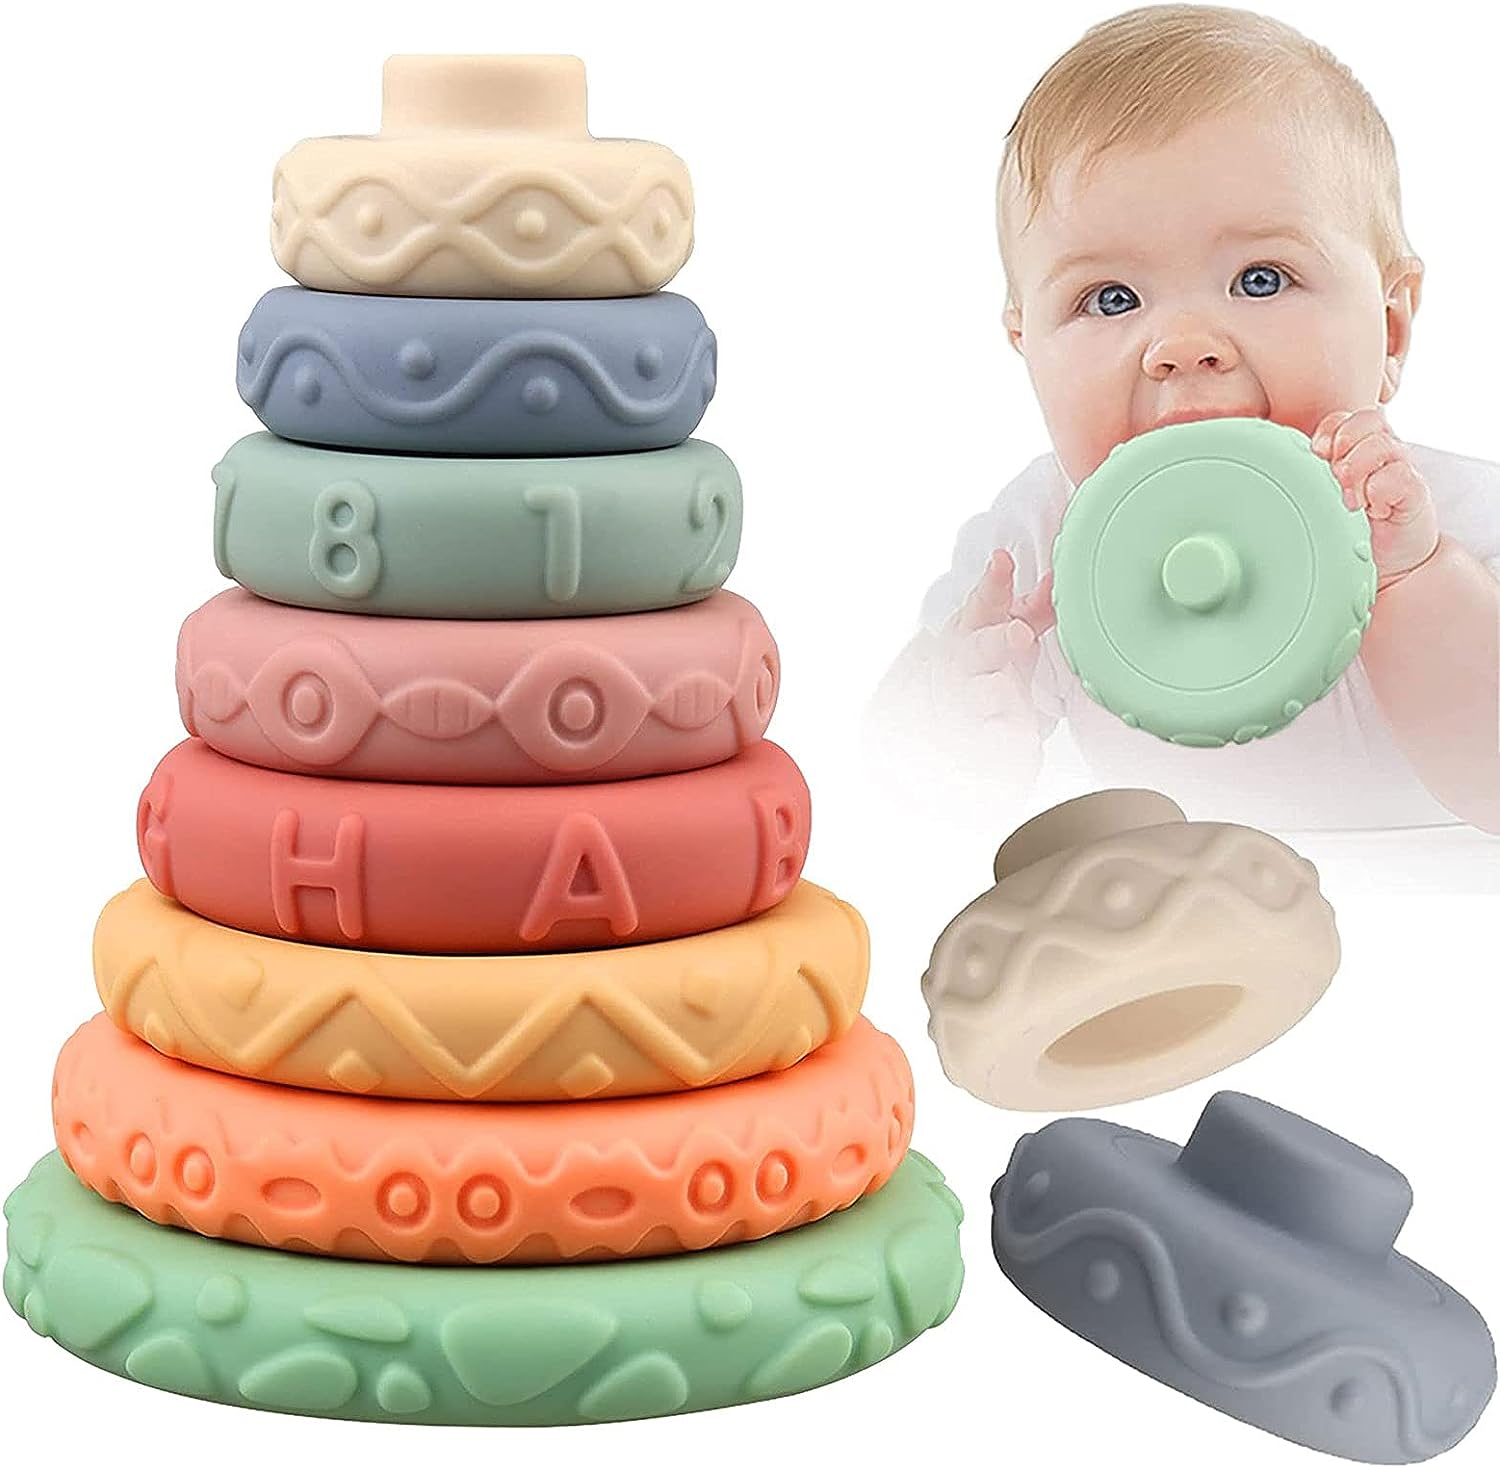 Donuts for Kids 3-5 Years Old Boy Gifts Stacking Fine Motor Skill